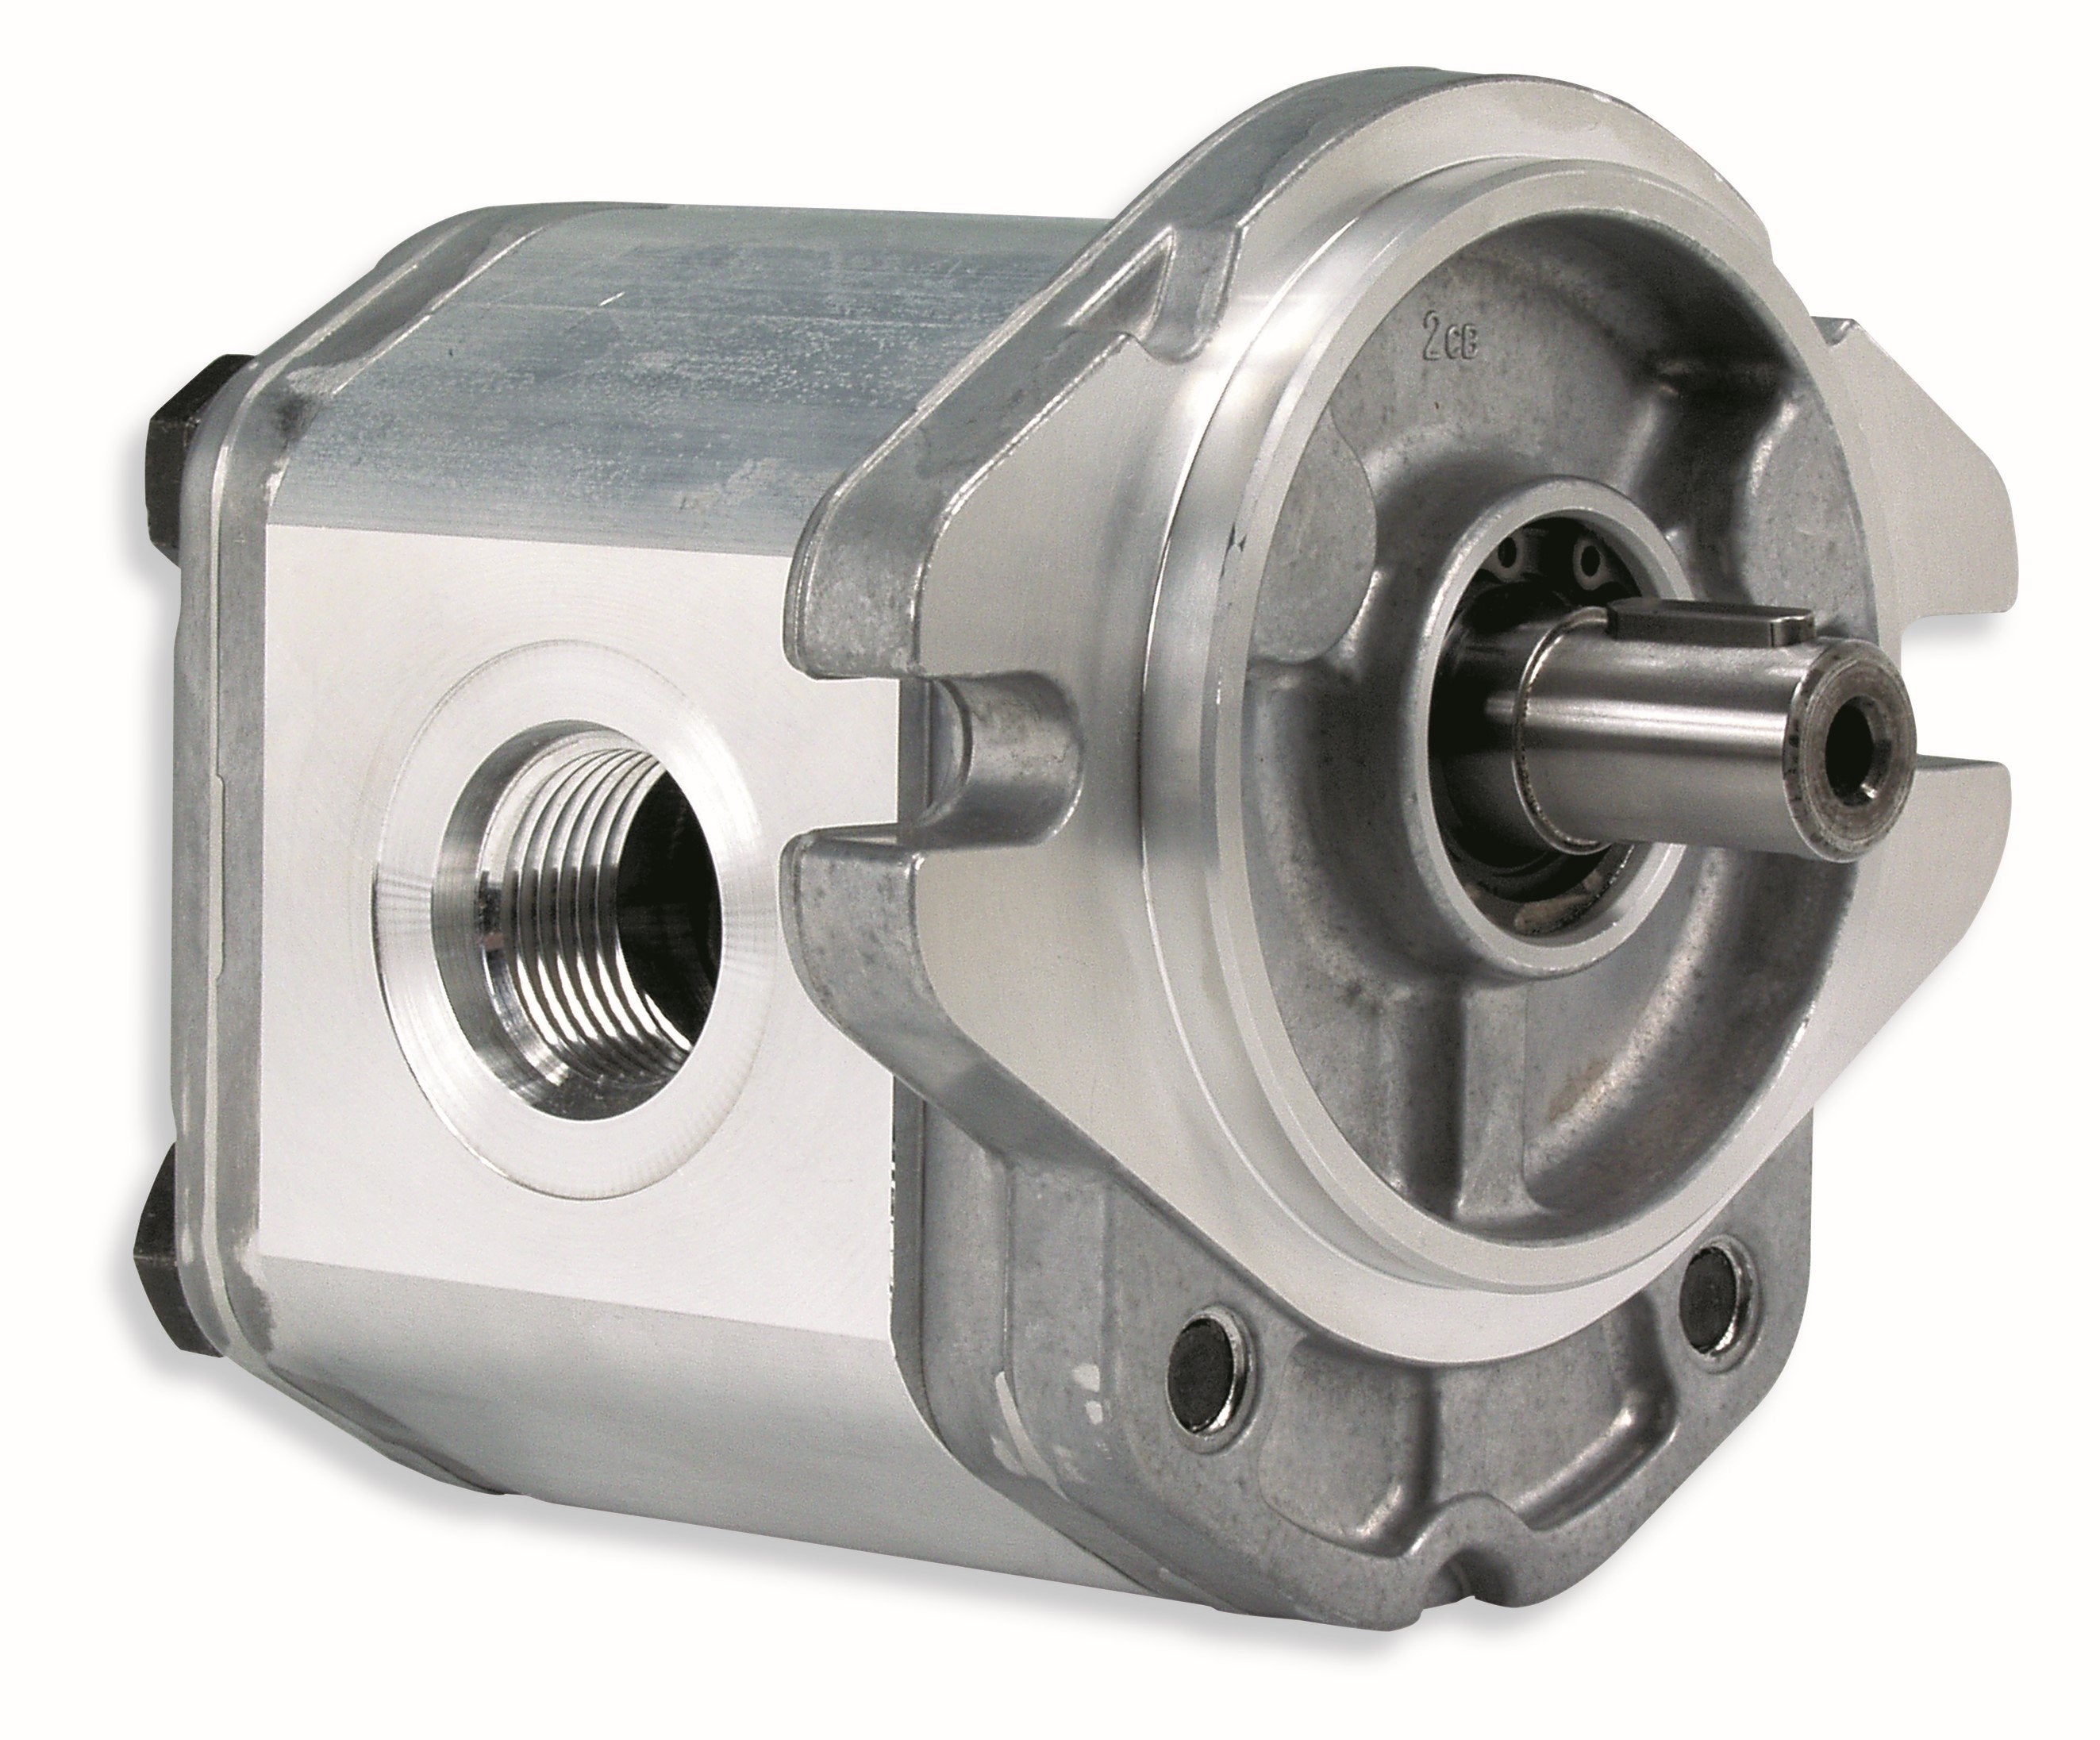 GHM2A-R-9-E2 : Marzocchi Gear Motor, Bidirectional, 6.4cc, 4060psi rated, 4000RPM, 0.75 (3/4") #12 SAE ports, 5/8" Bore x 5/32" Keyed Shaft